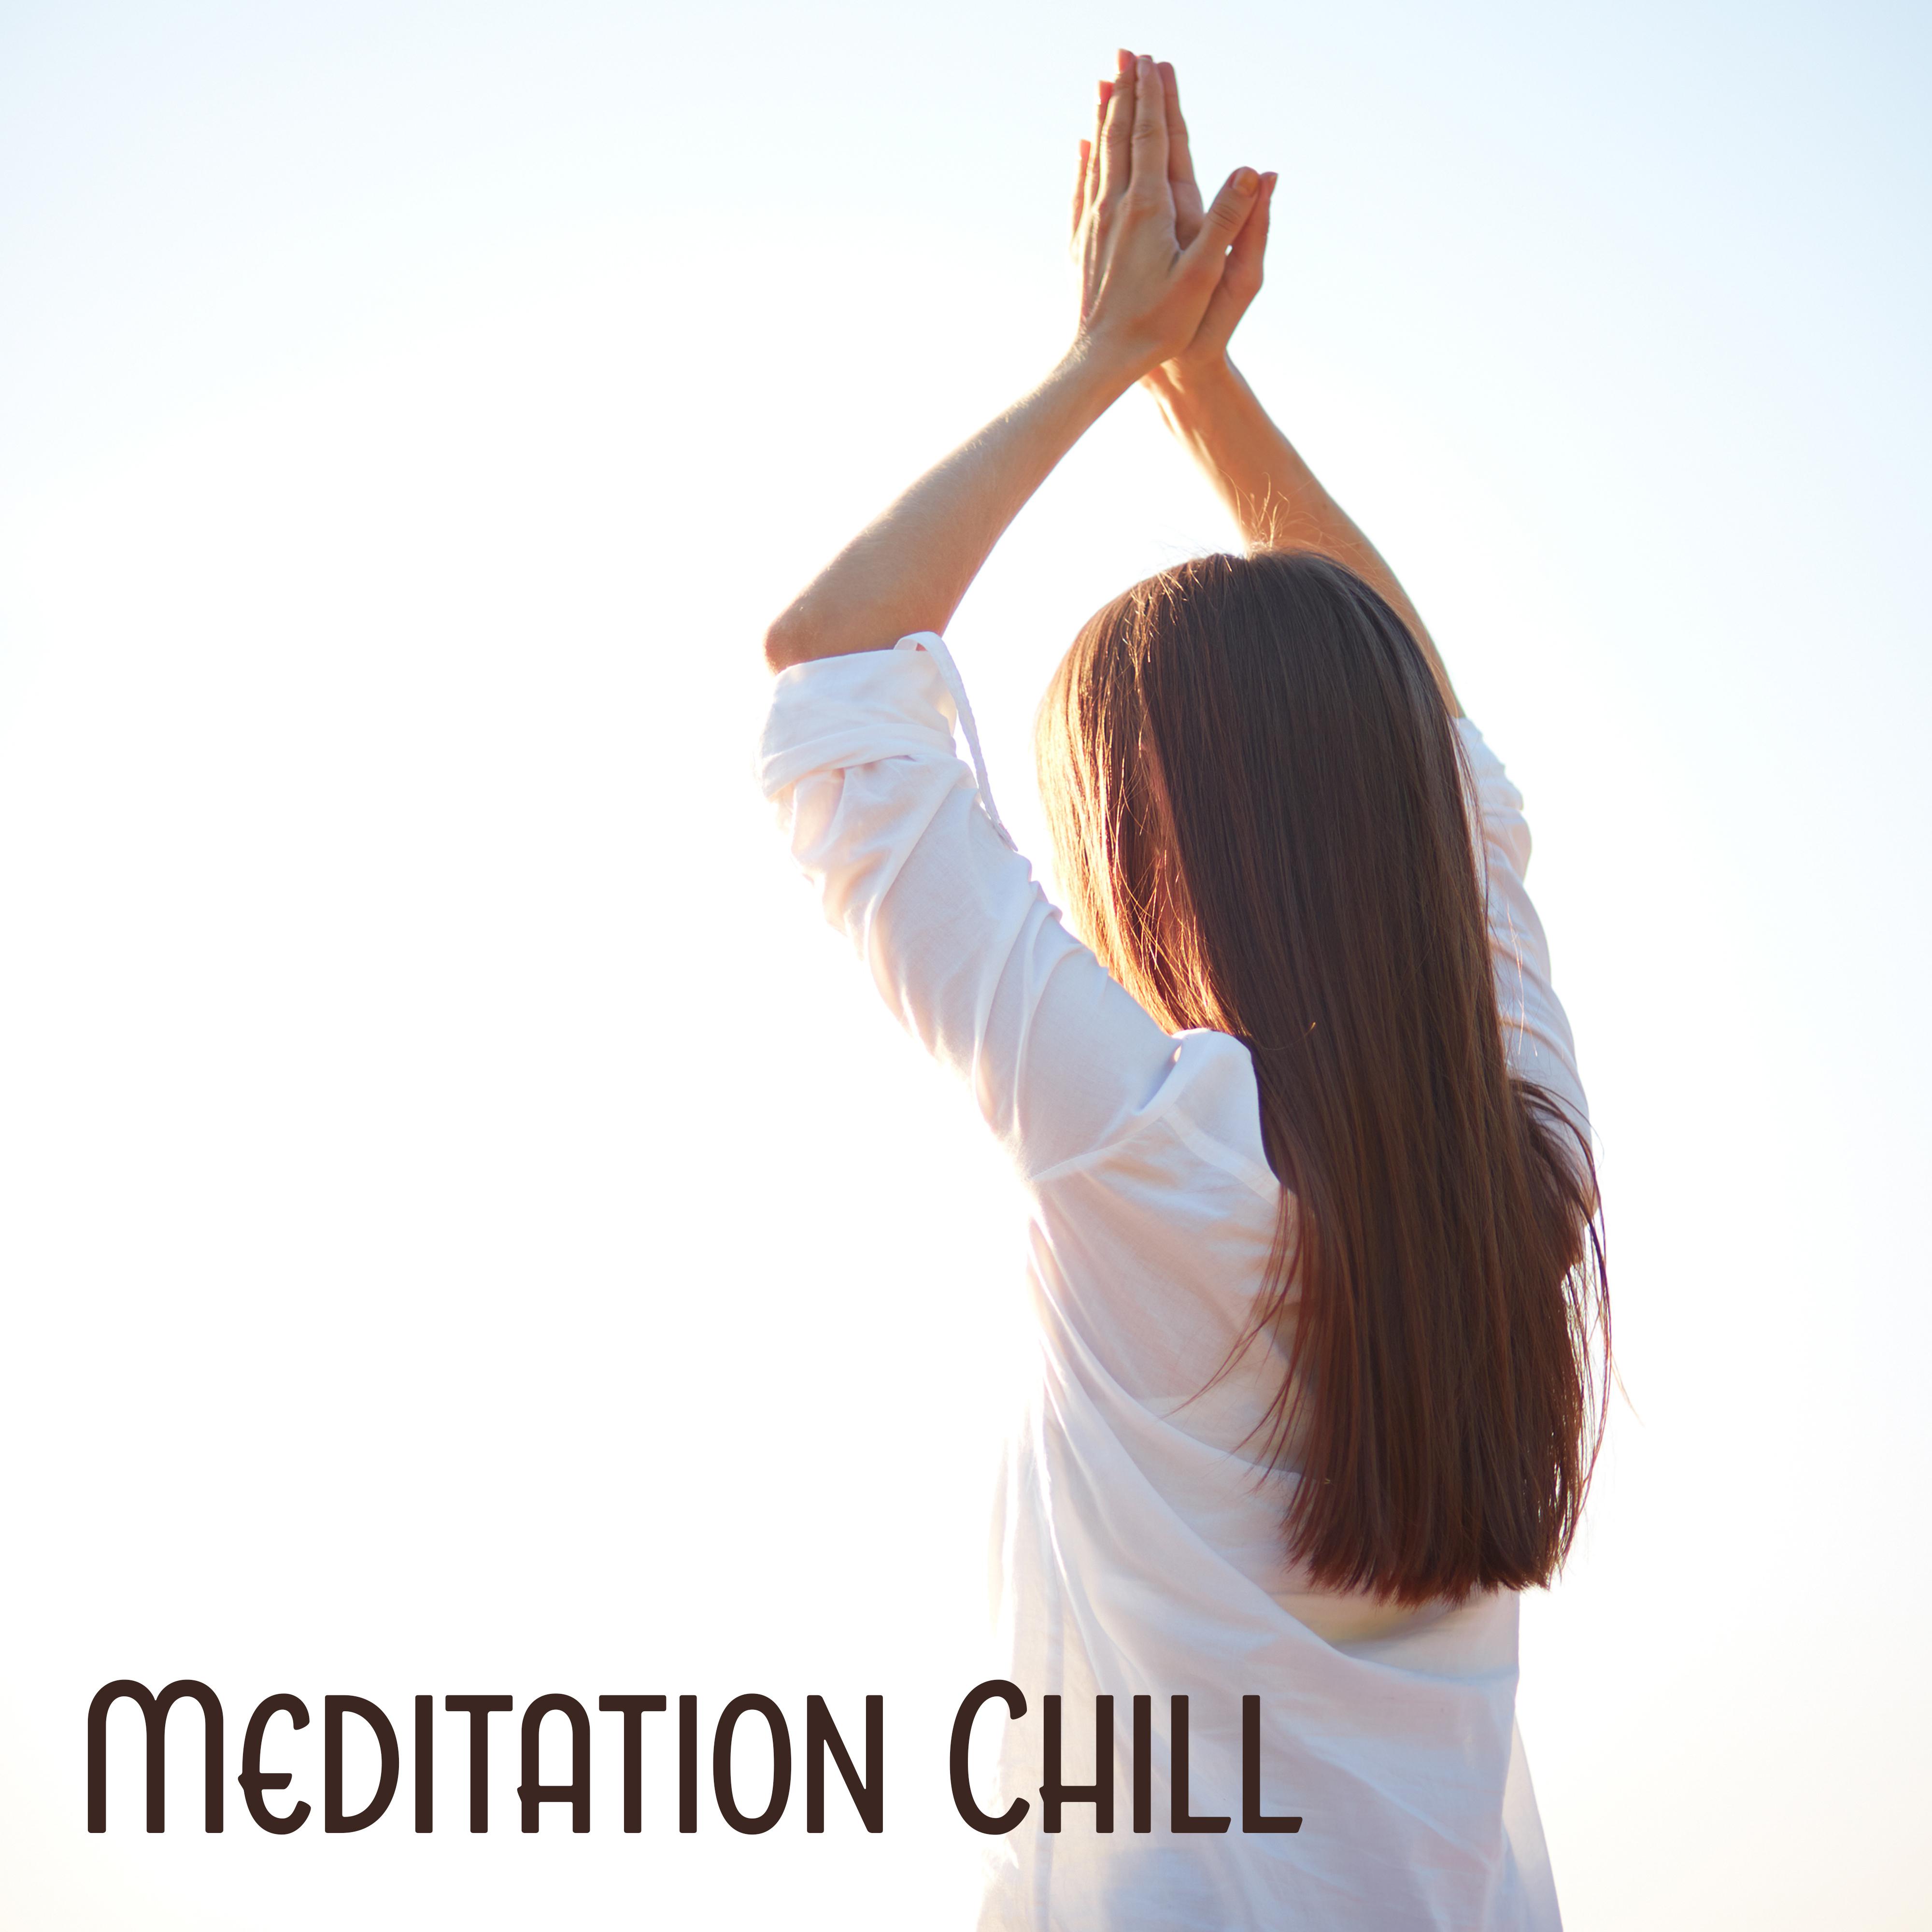 Meditation Chill  Relaxing Music, Sounds of Nature, Deep Meditation, Mantra, Zen, Yoga for Beginners